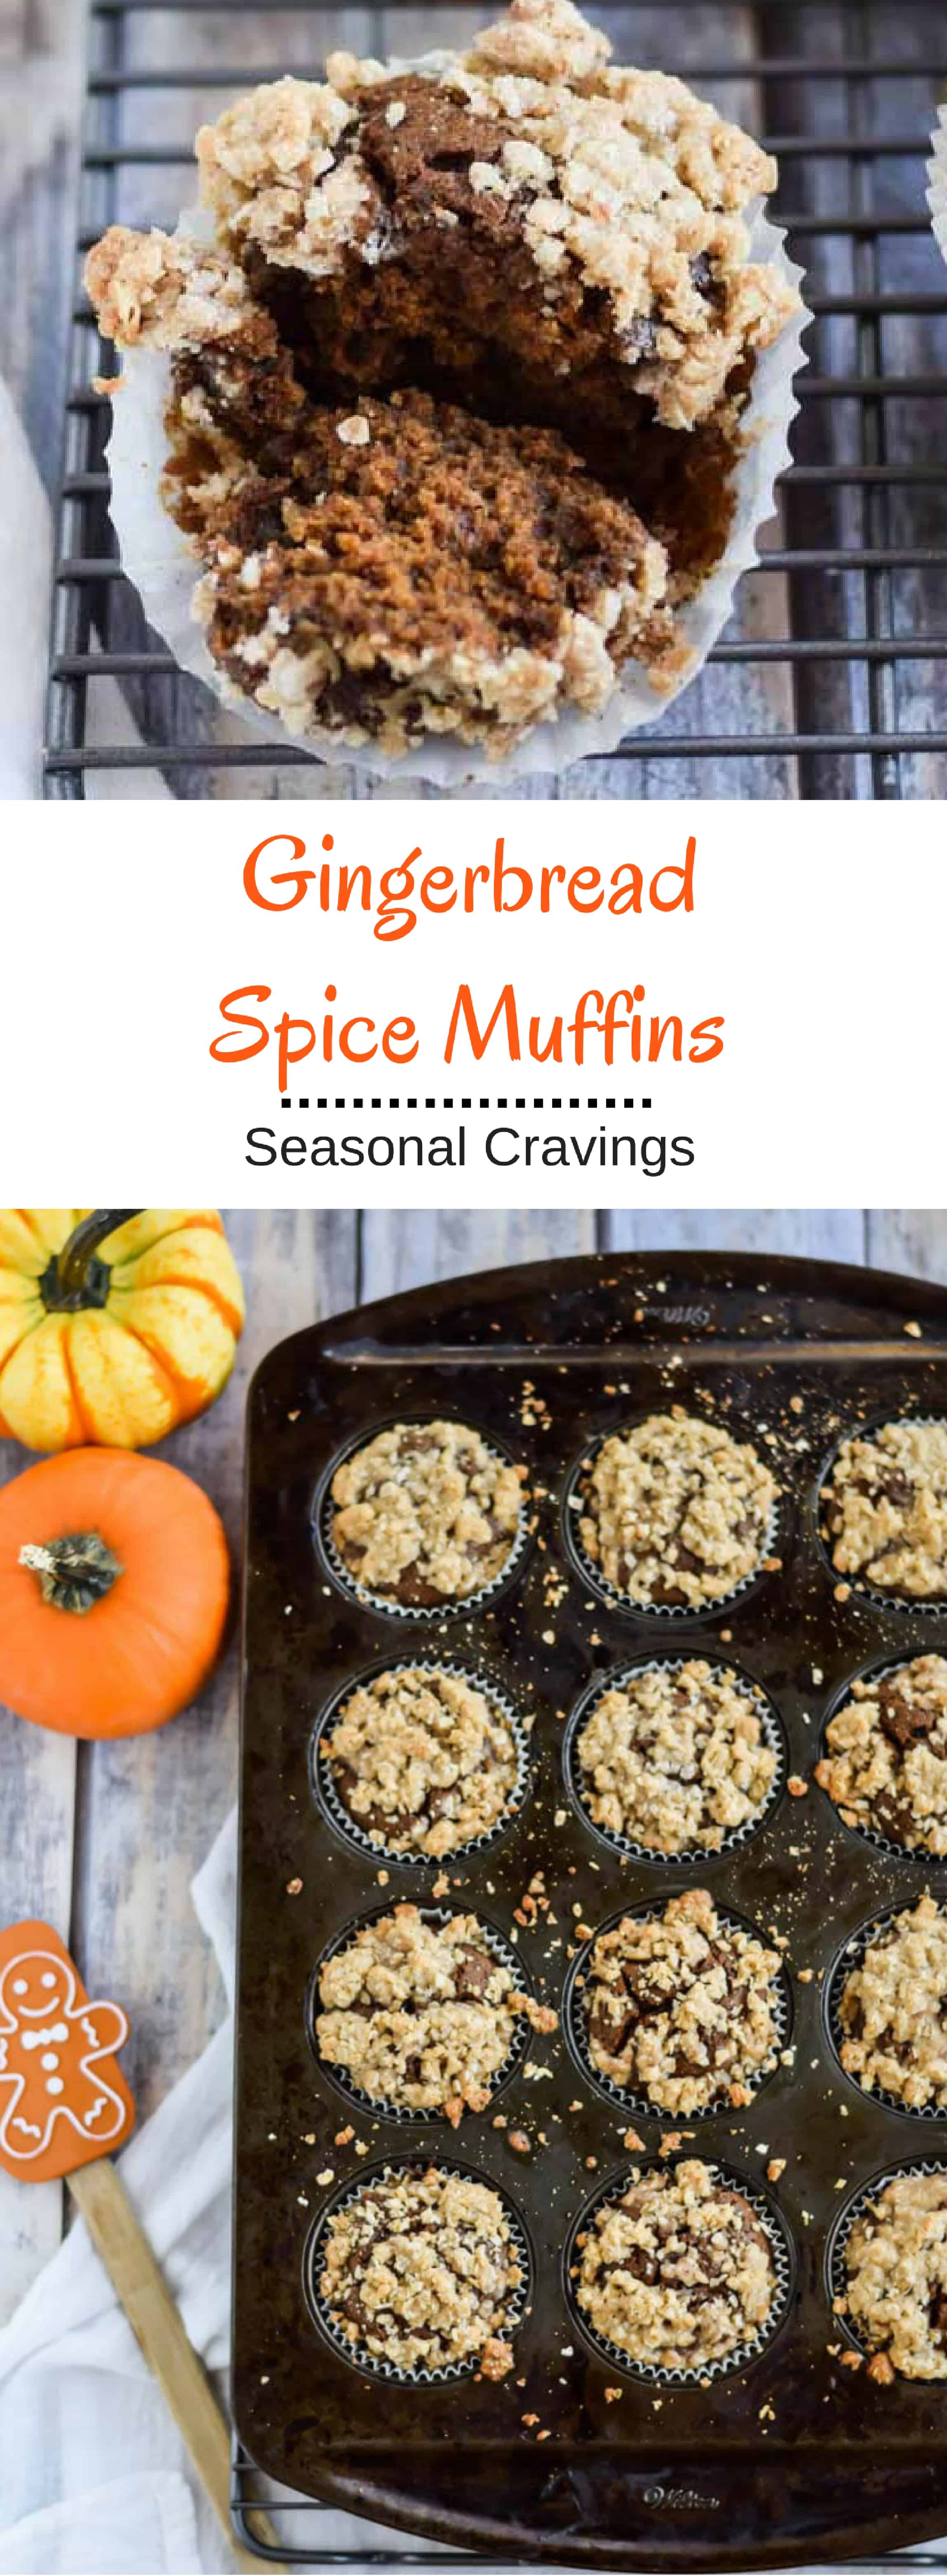 Gingerbread Spice Muffins